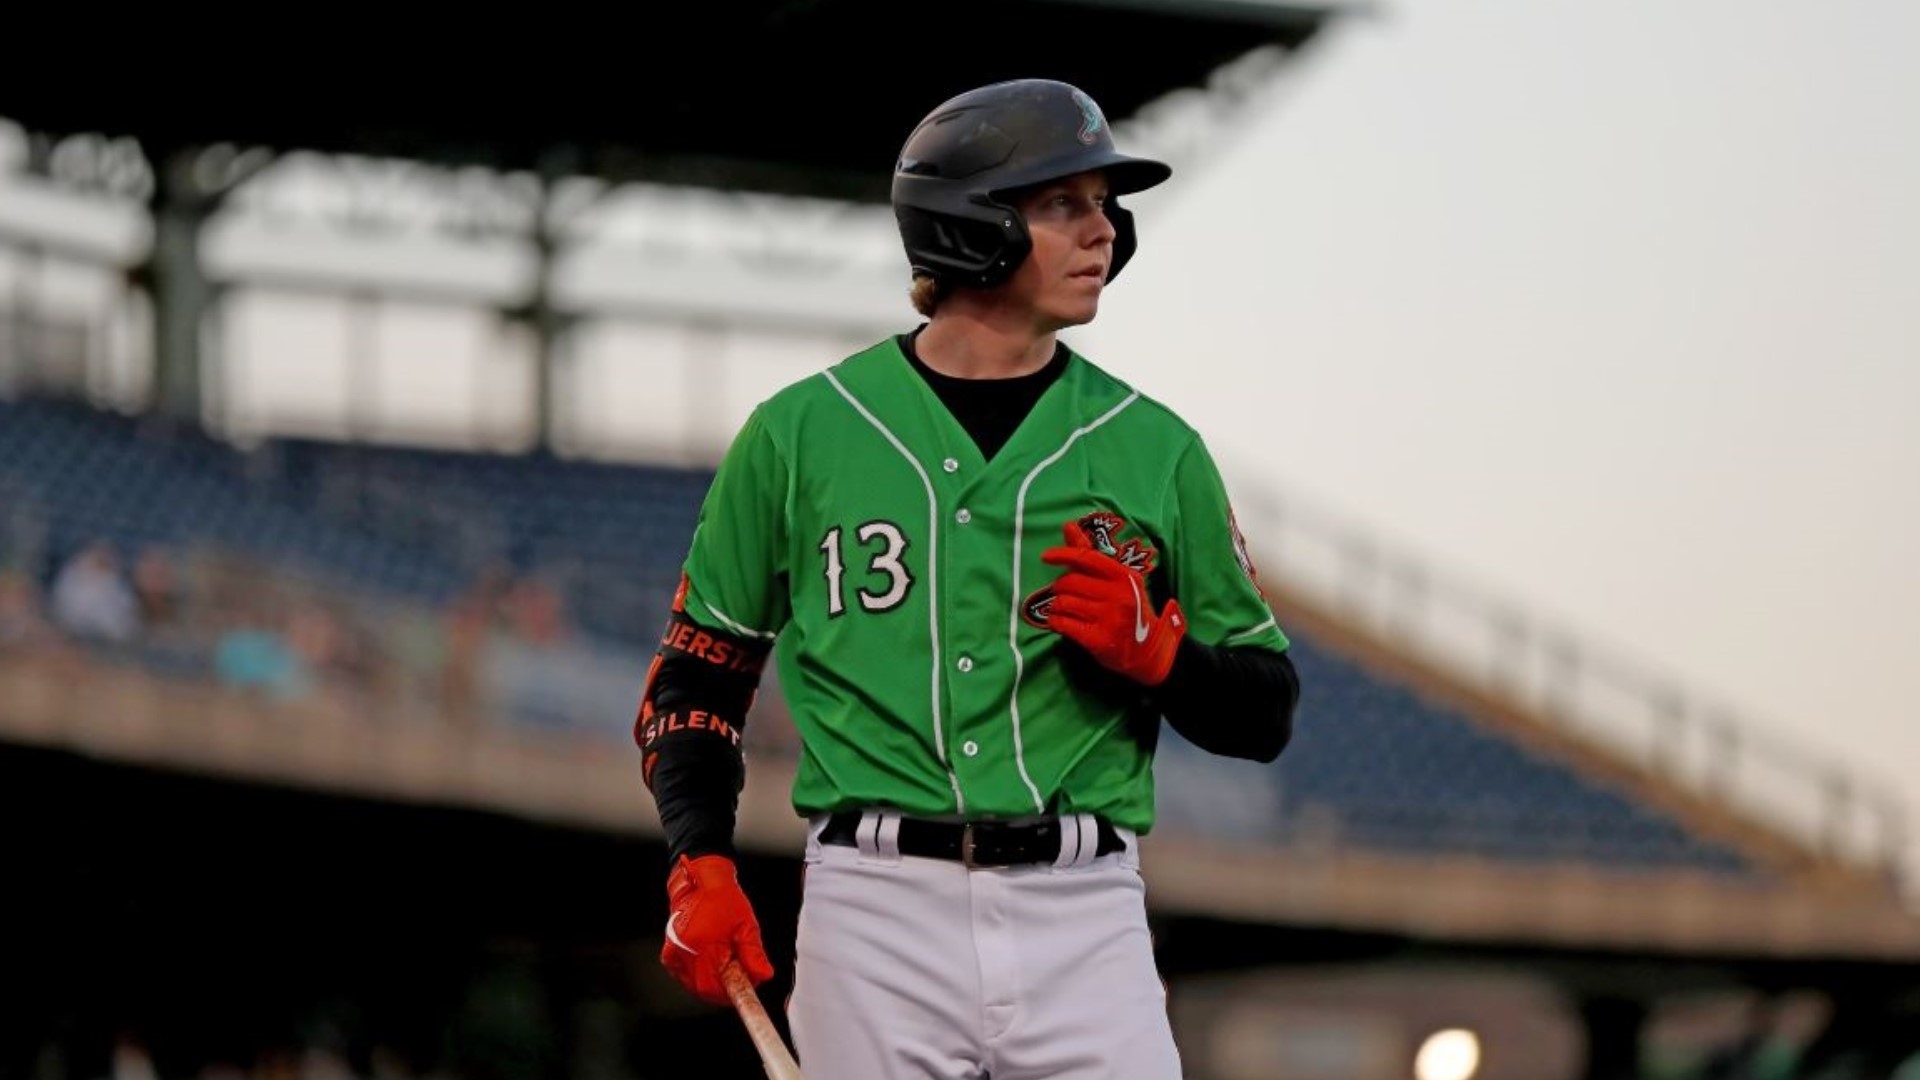 Heston Kjerstad is ranked 29th on MLB Pipeline's prospect list. He was the No. 2 pick in the 2020 draft and made his big league debut last season.